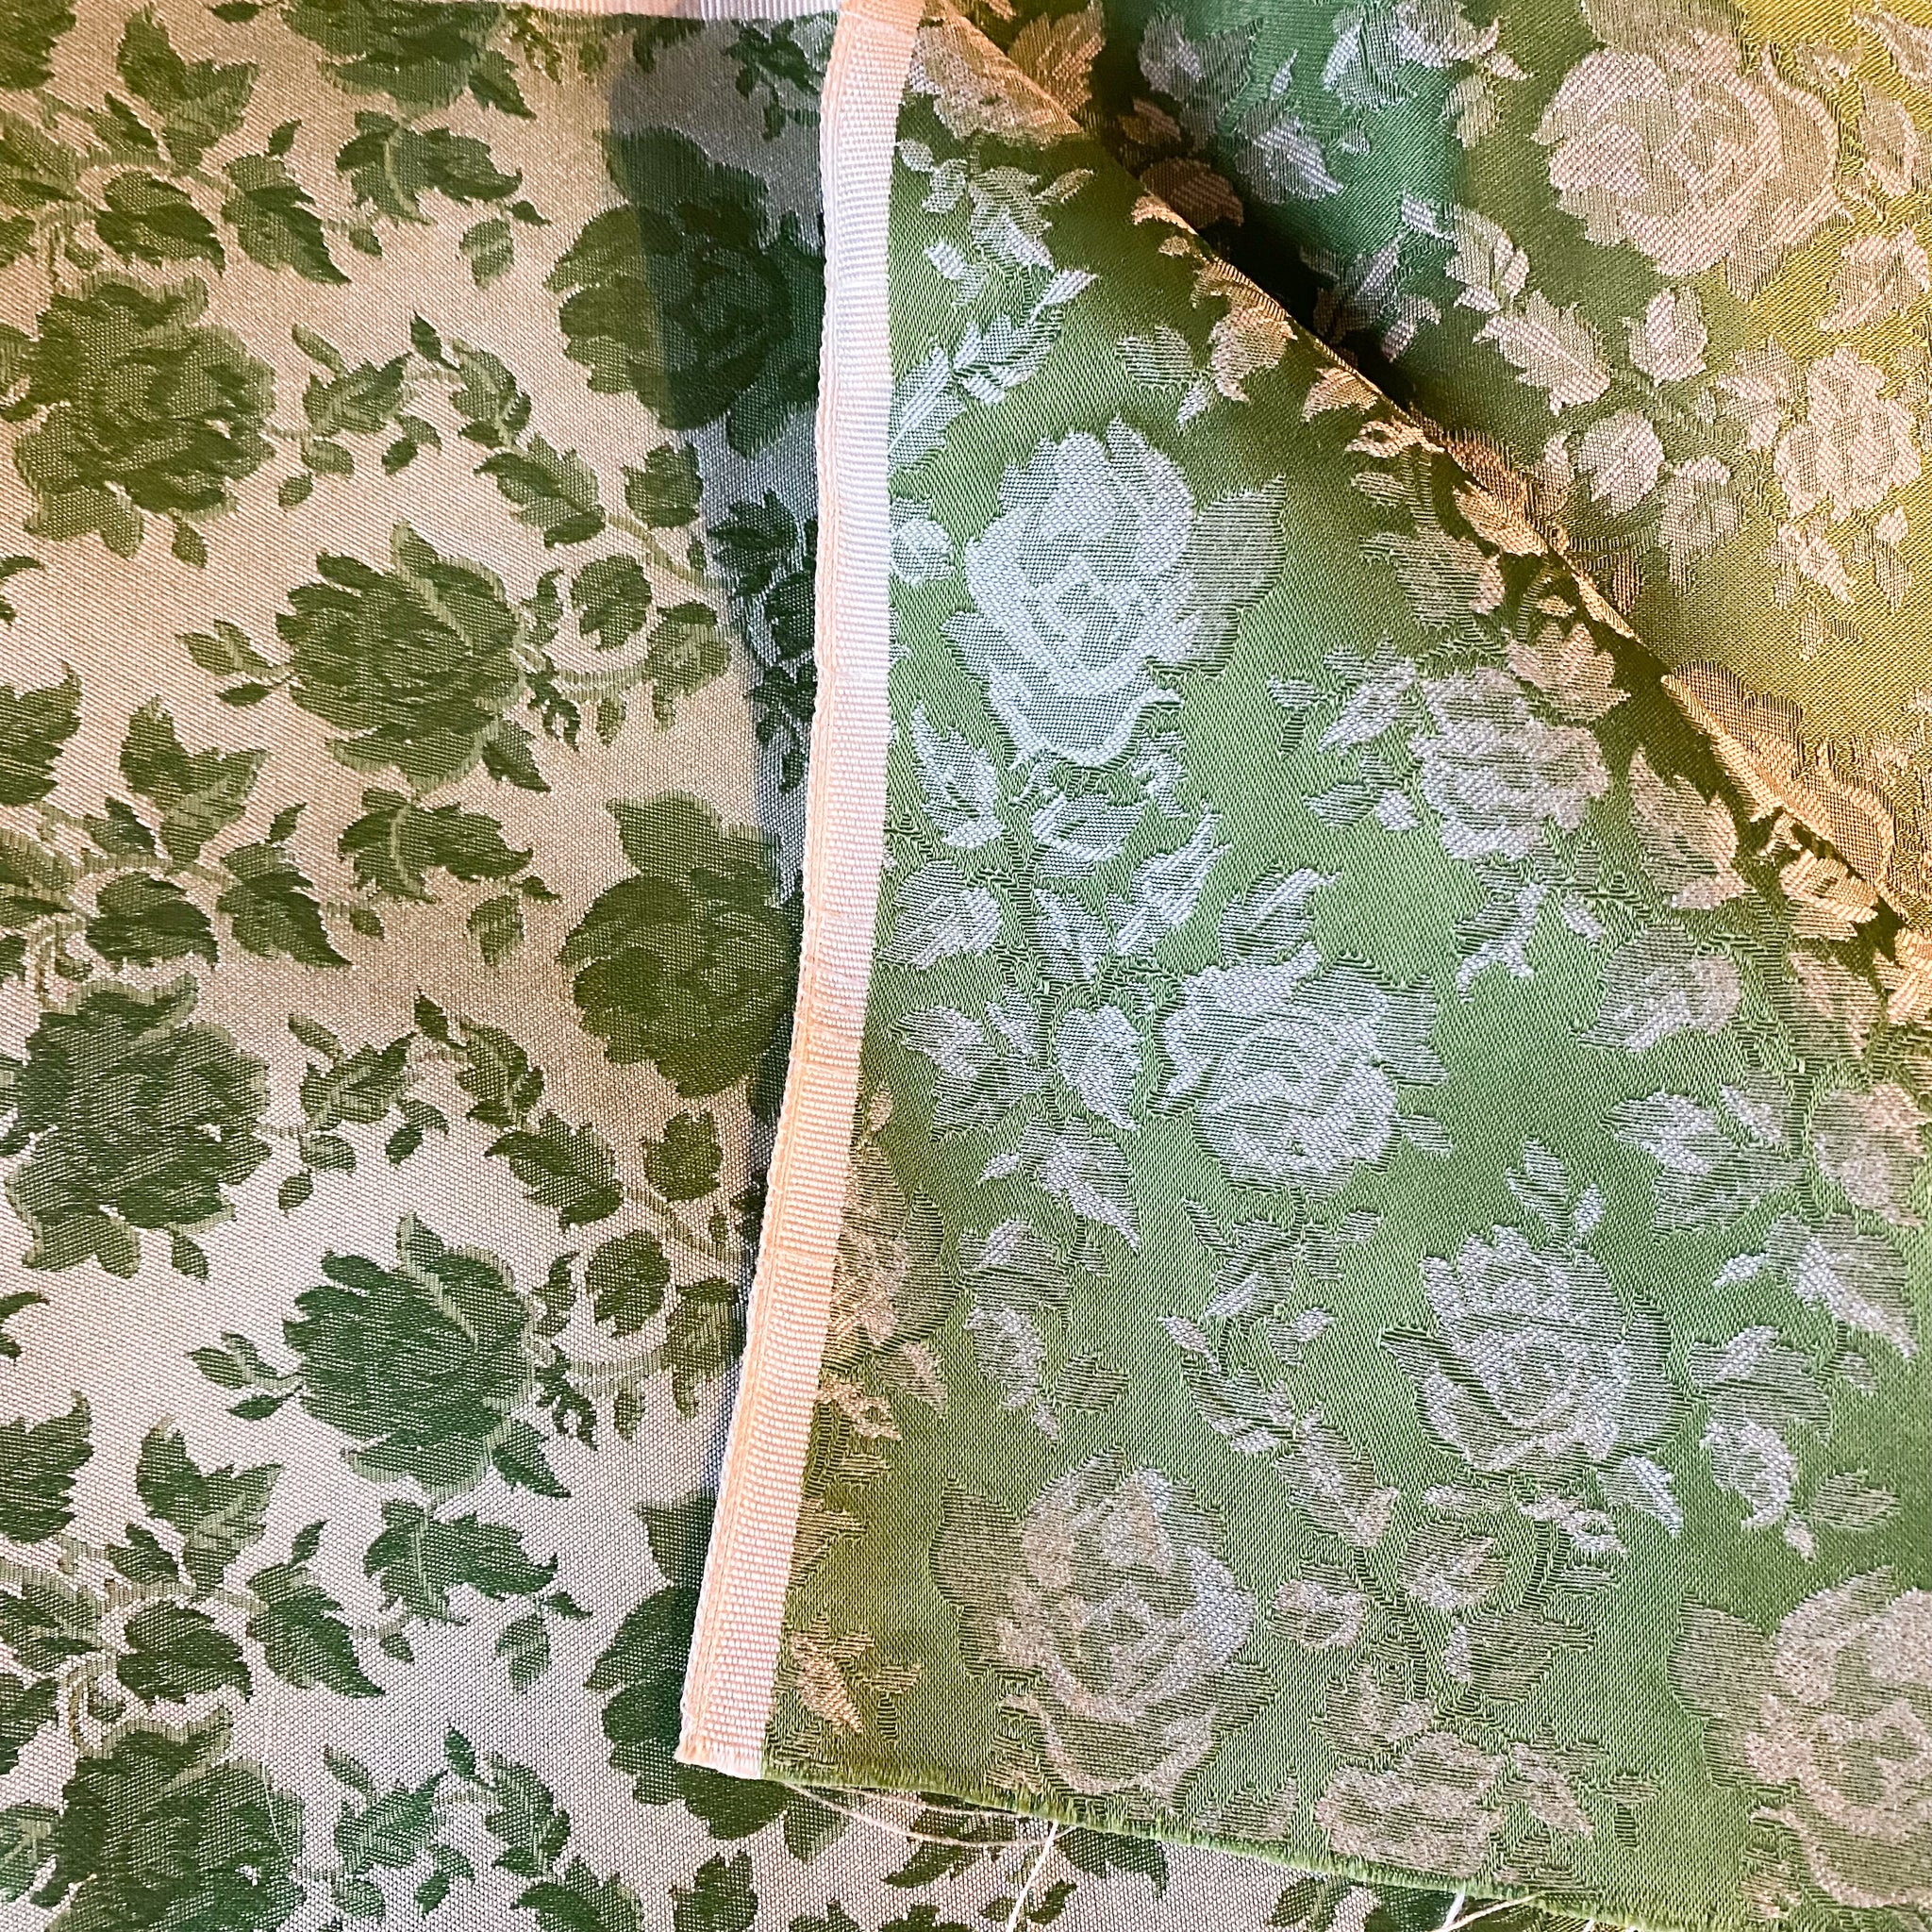 Vintage 1960s Green Floral Tone on Tone Upholstery Fabric - Brocade Damask-Style Fabric Remnant - 4 yards x 1 yard